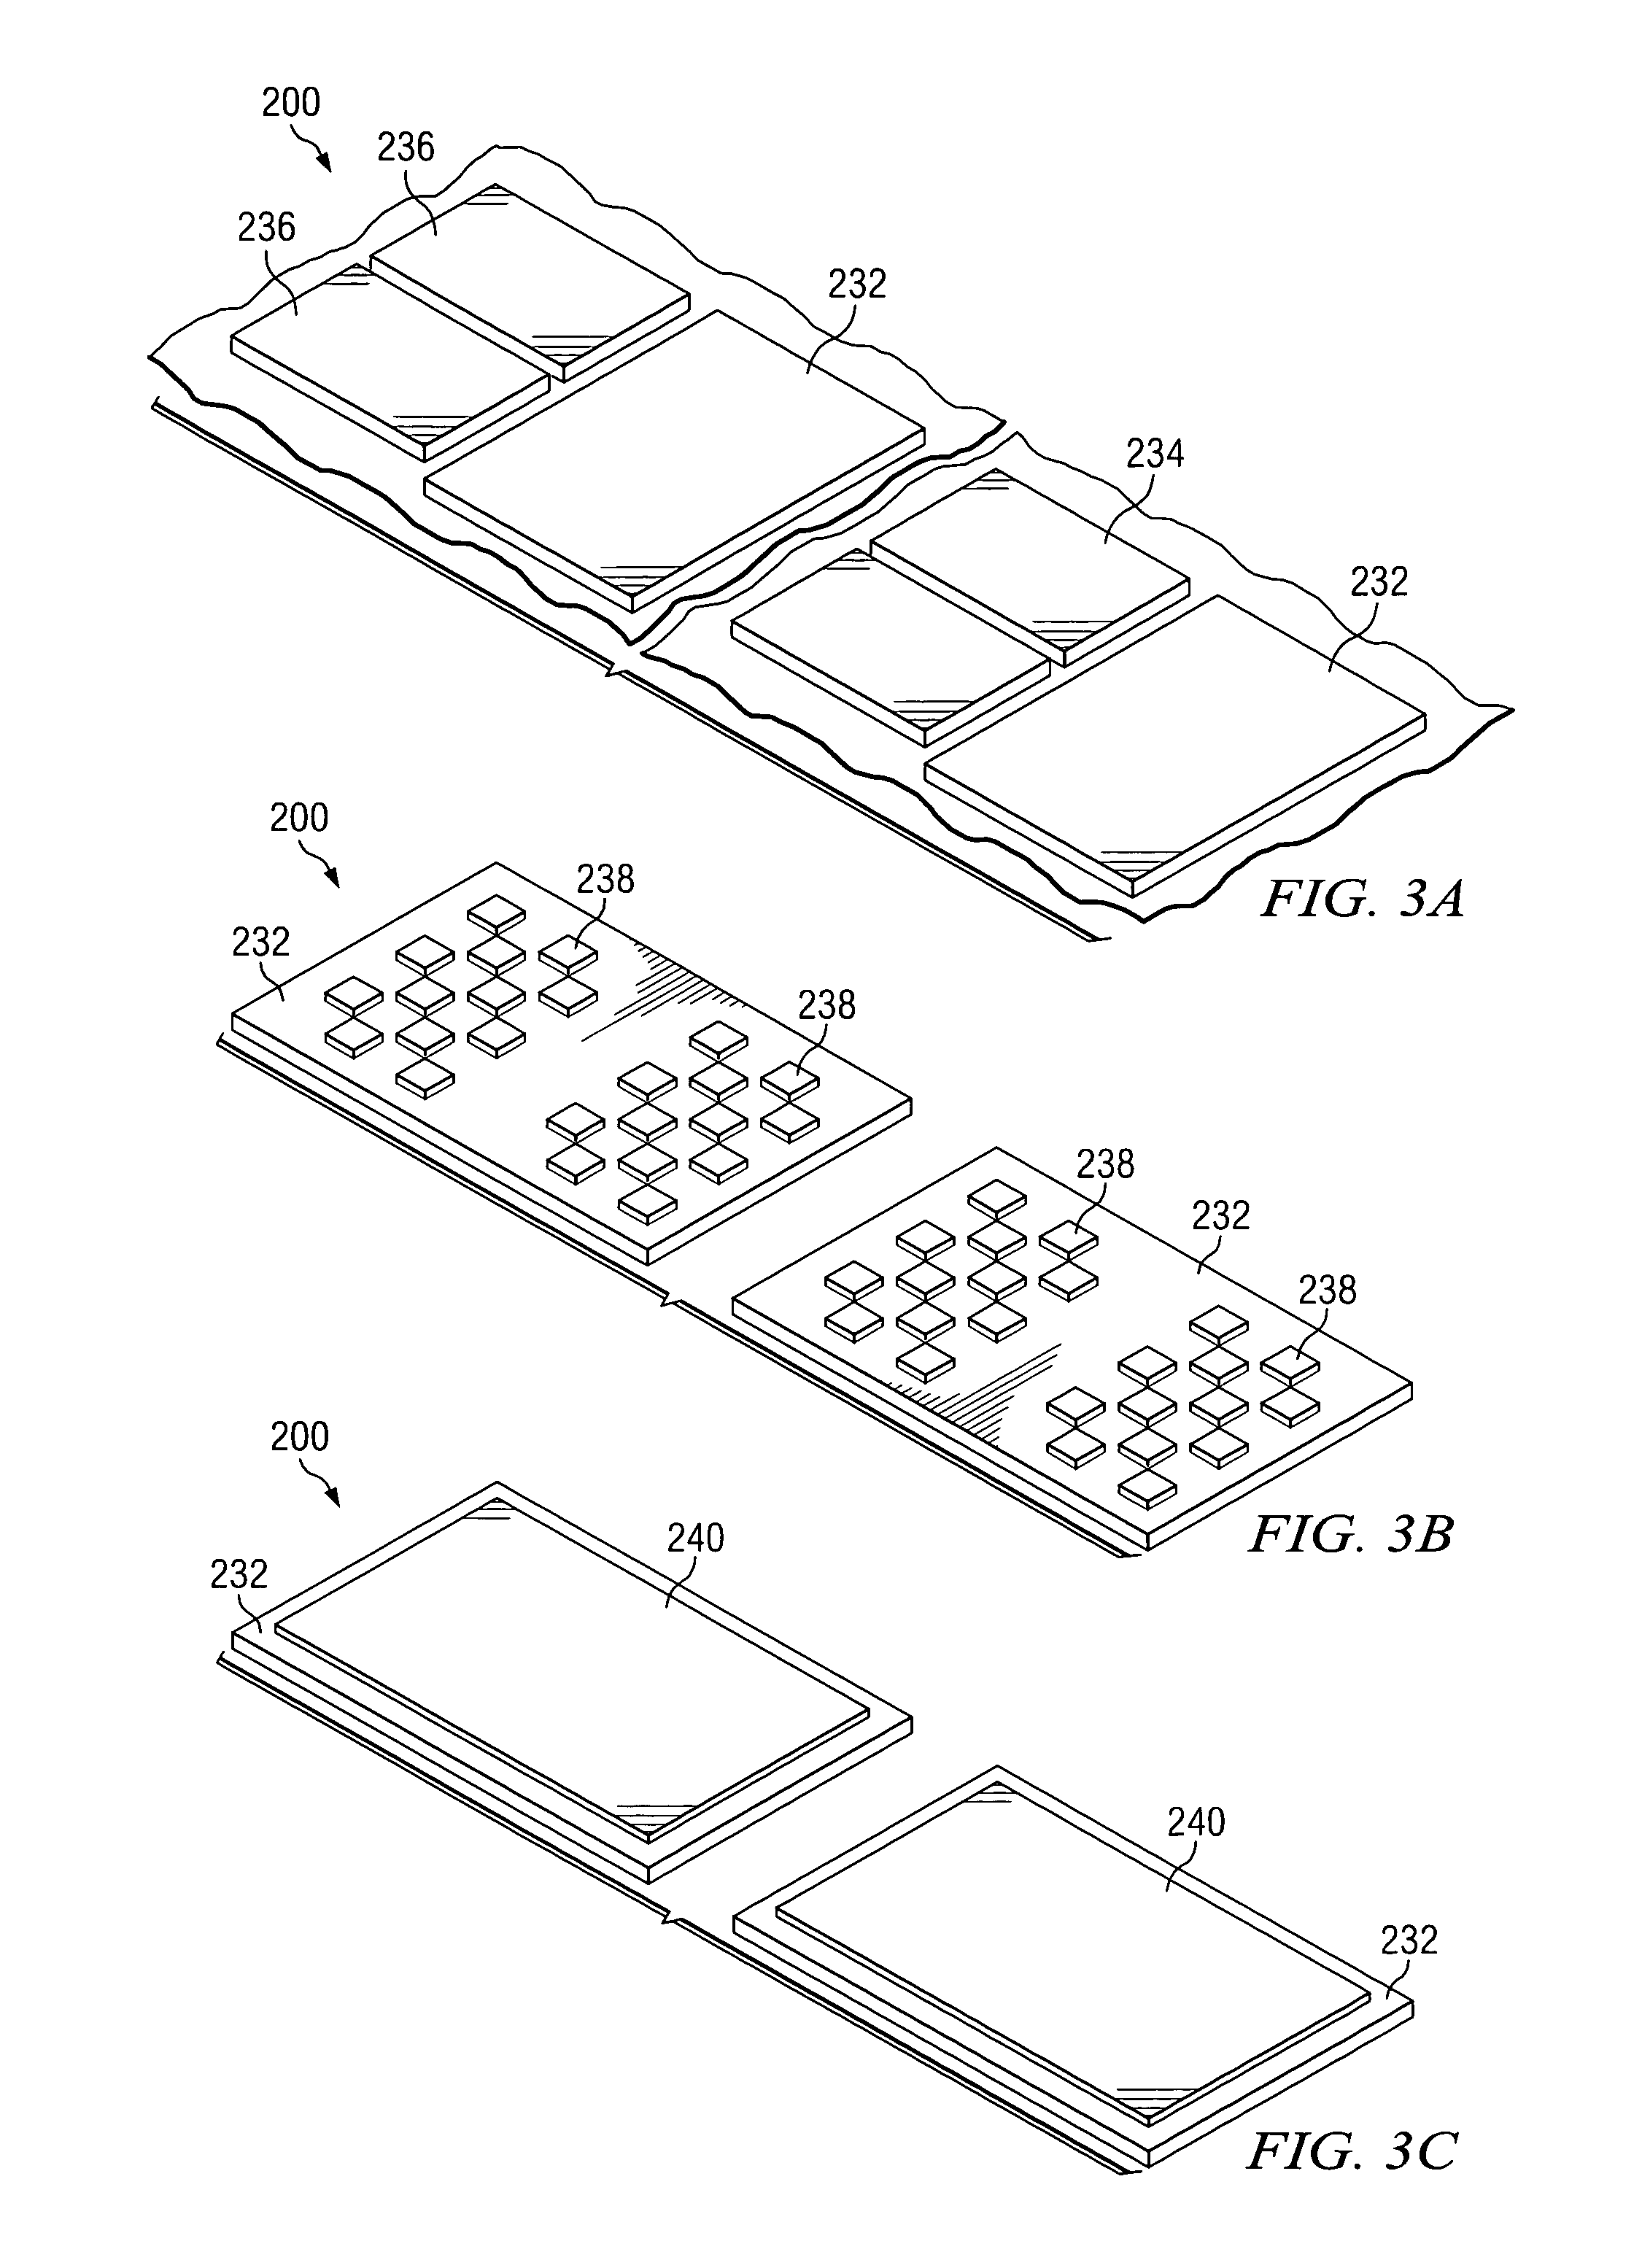 Build-in-place method of manufacturing thermoelectric modules